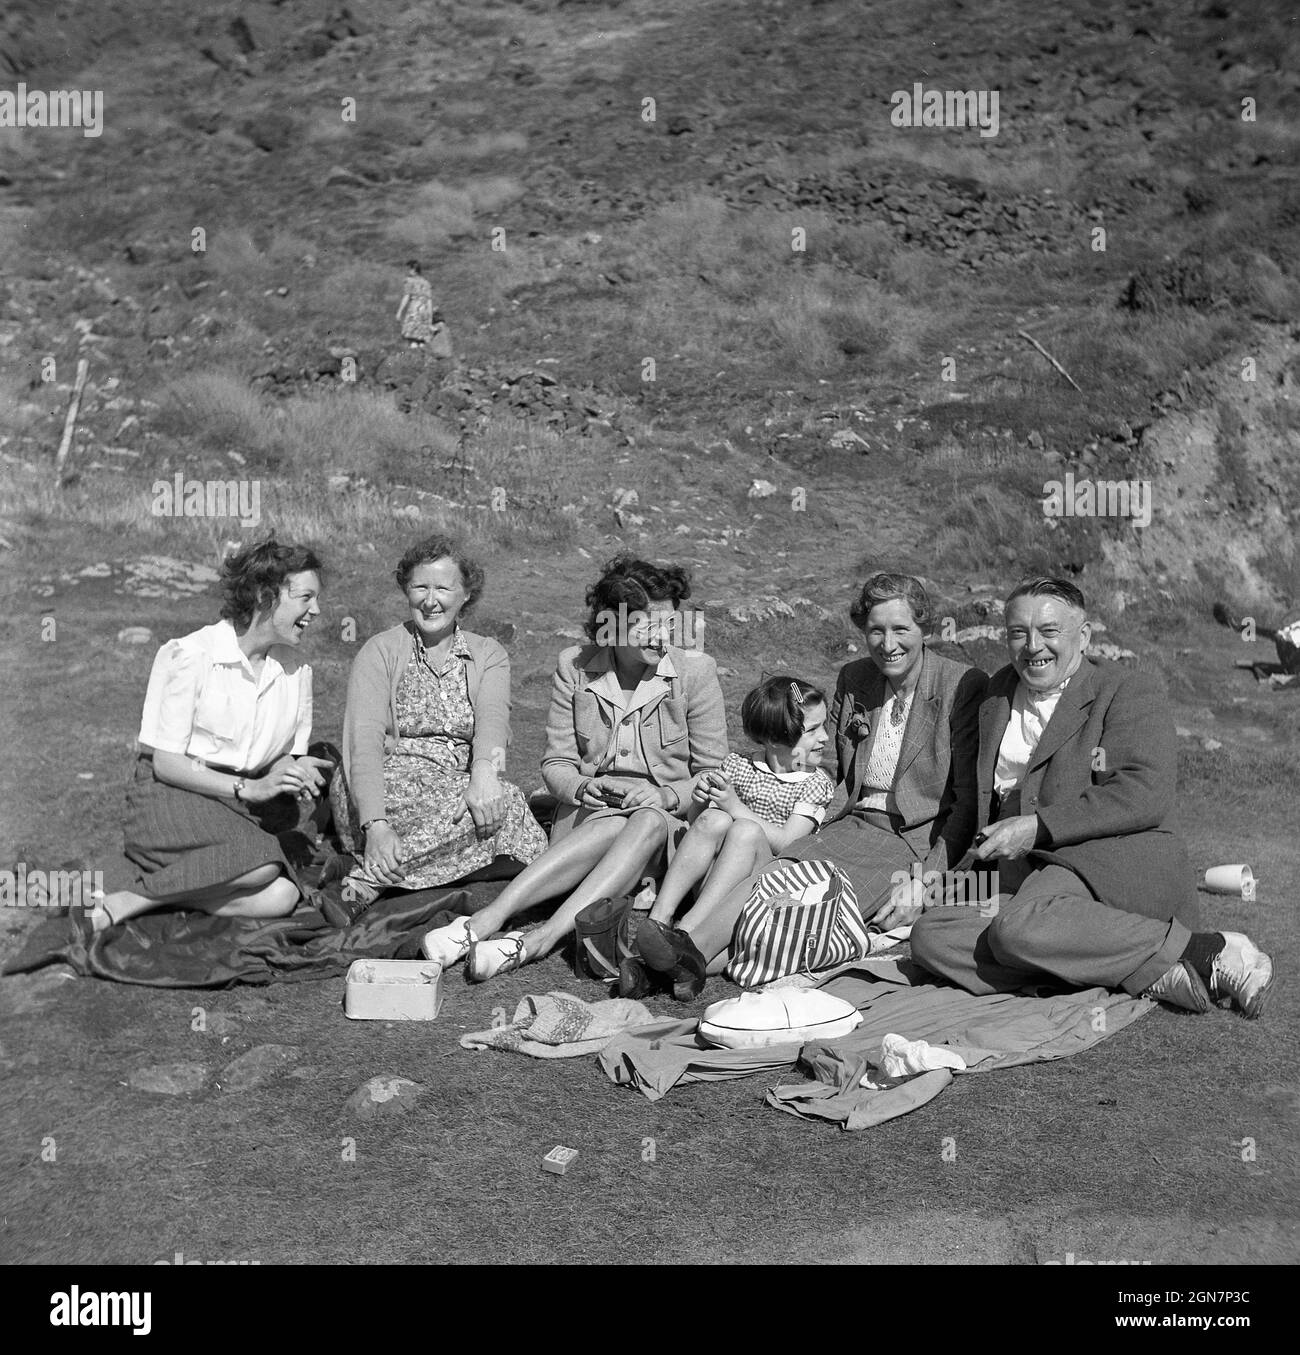 1950s, historical, four women, a young girl and elderrly man, probably the girl's grandfather sitting on their coats on a grassy hillside enjoying themselves together, having a laugh and having a light snack, maybe some sandwiches or cake, England, UK. Stock Photo